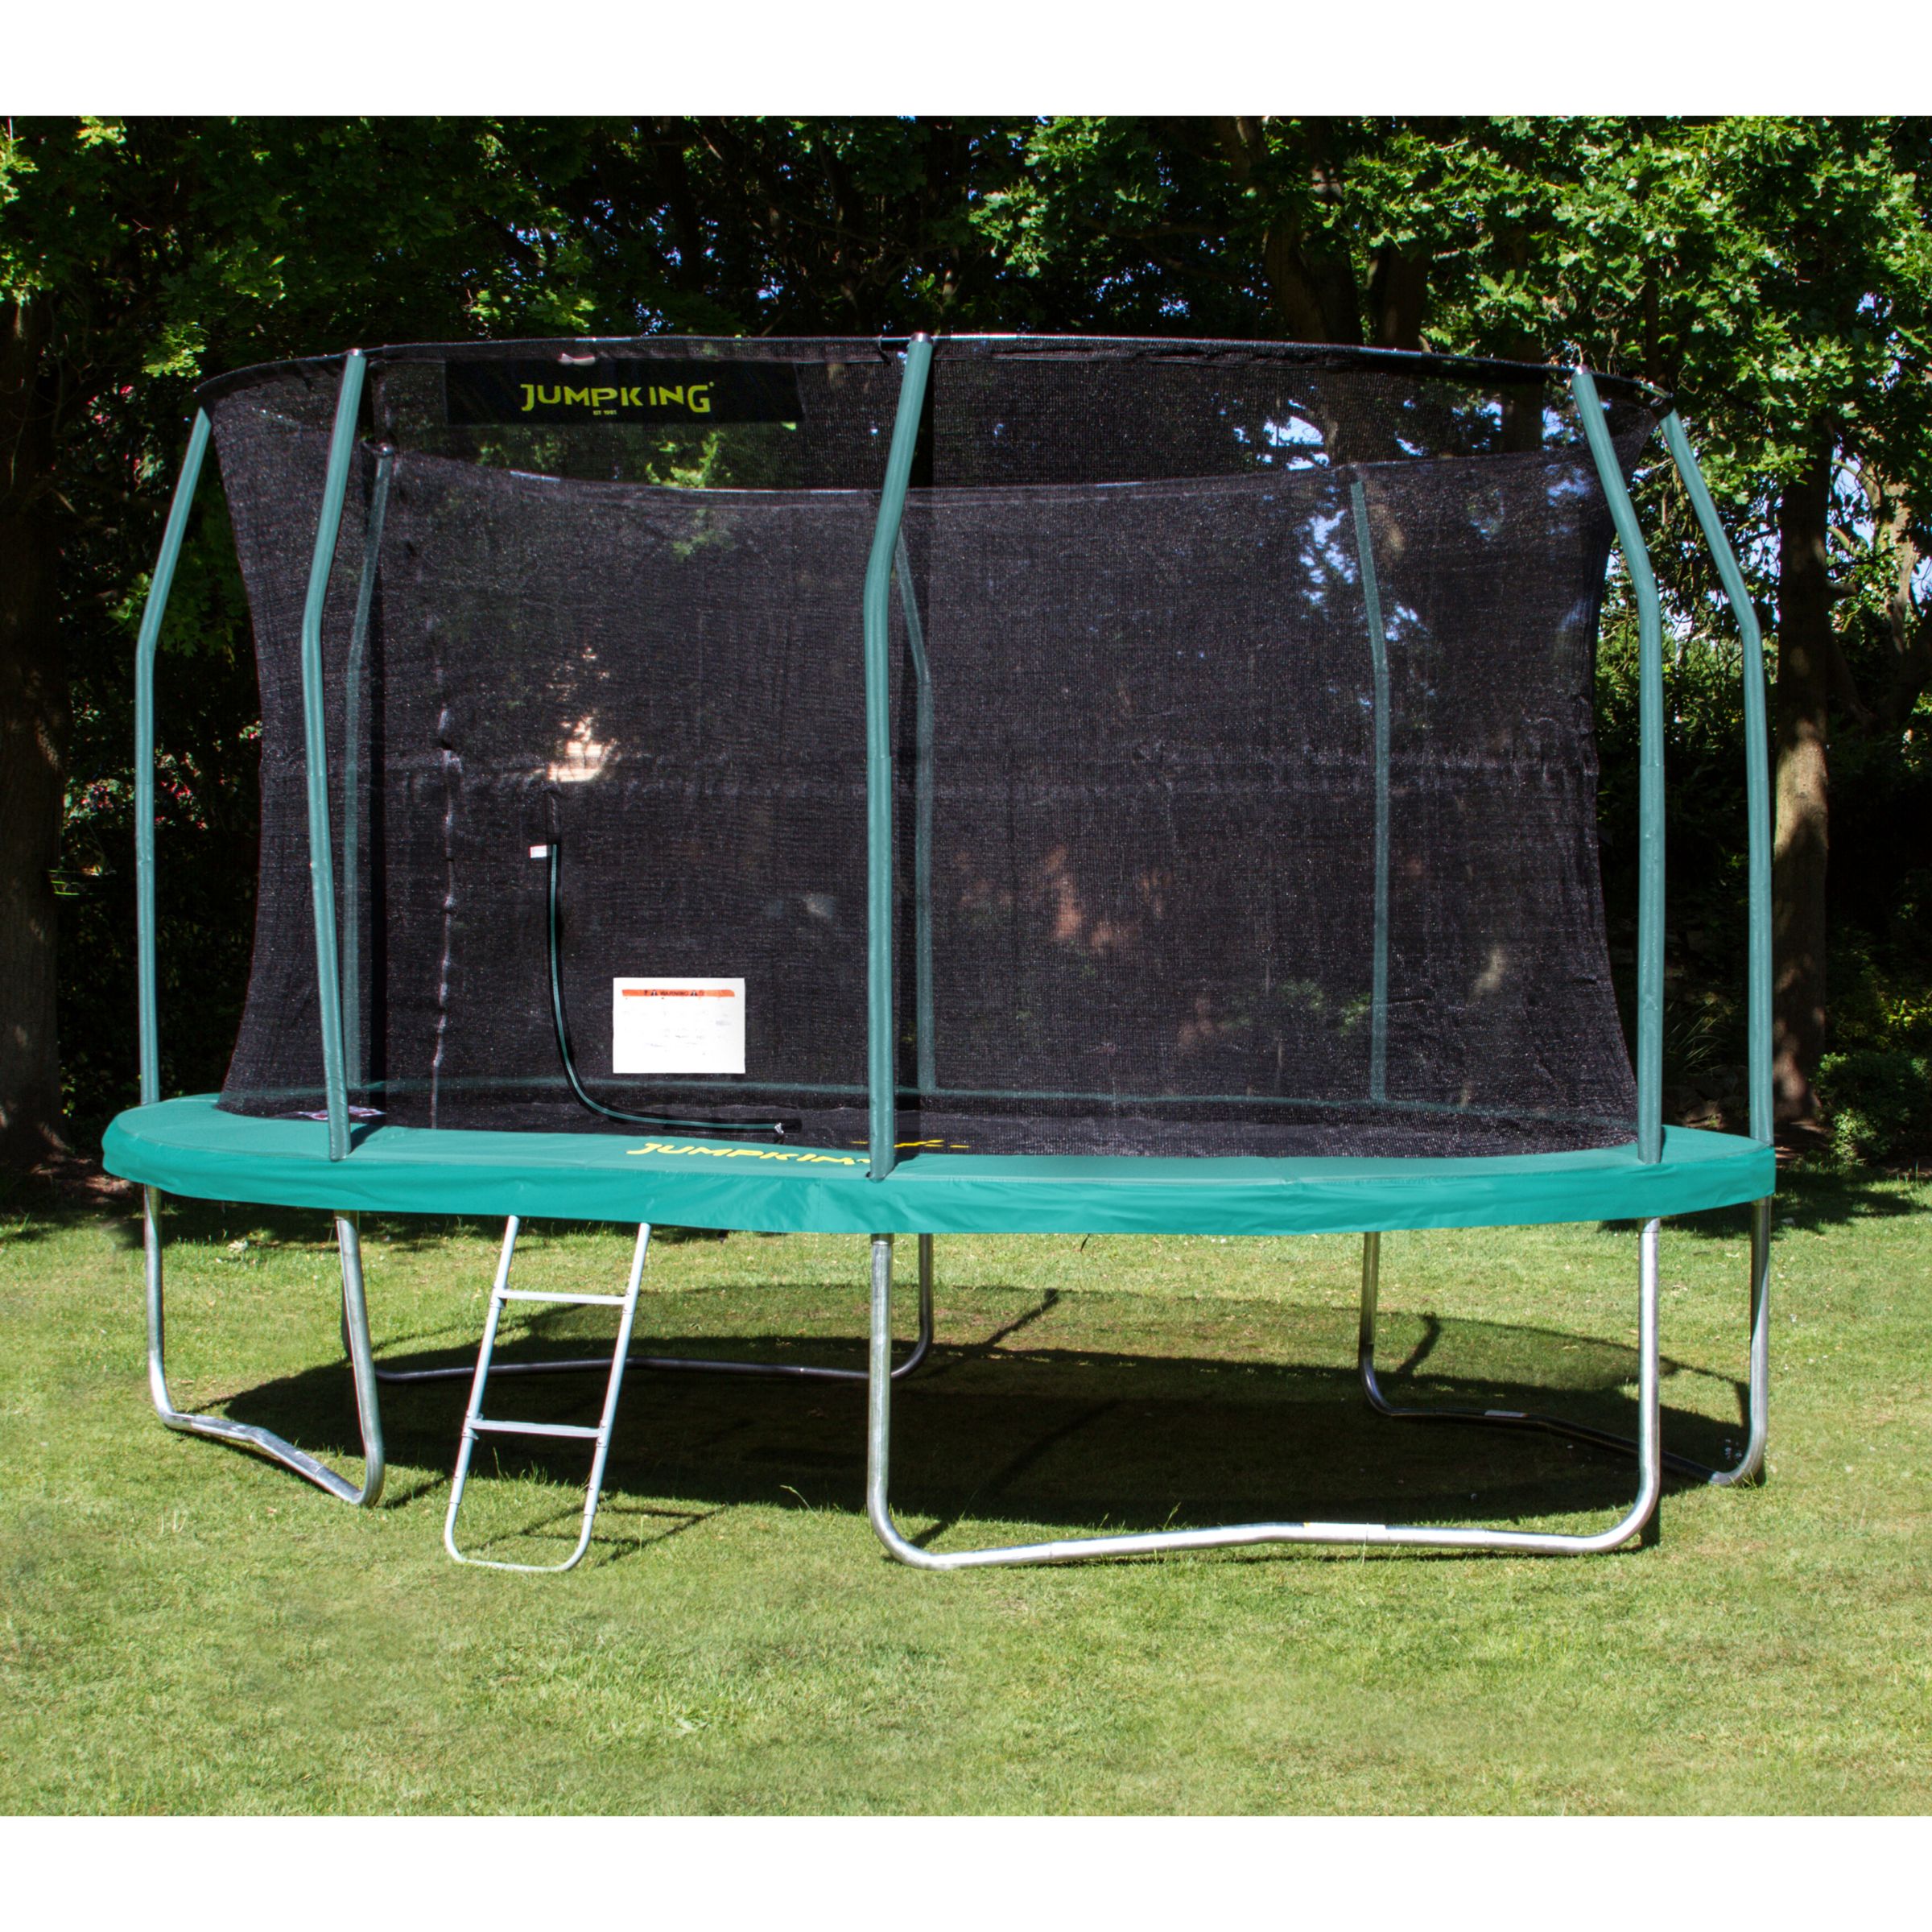 JumpKing 9 x 13ft Oval Trampoline at John Lewis & Partners